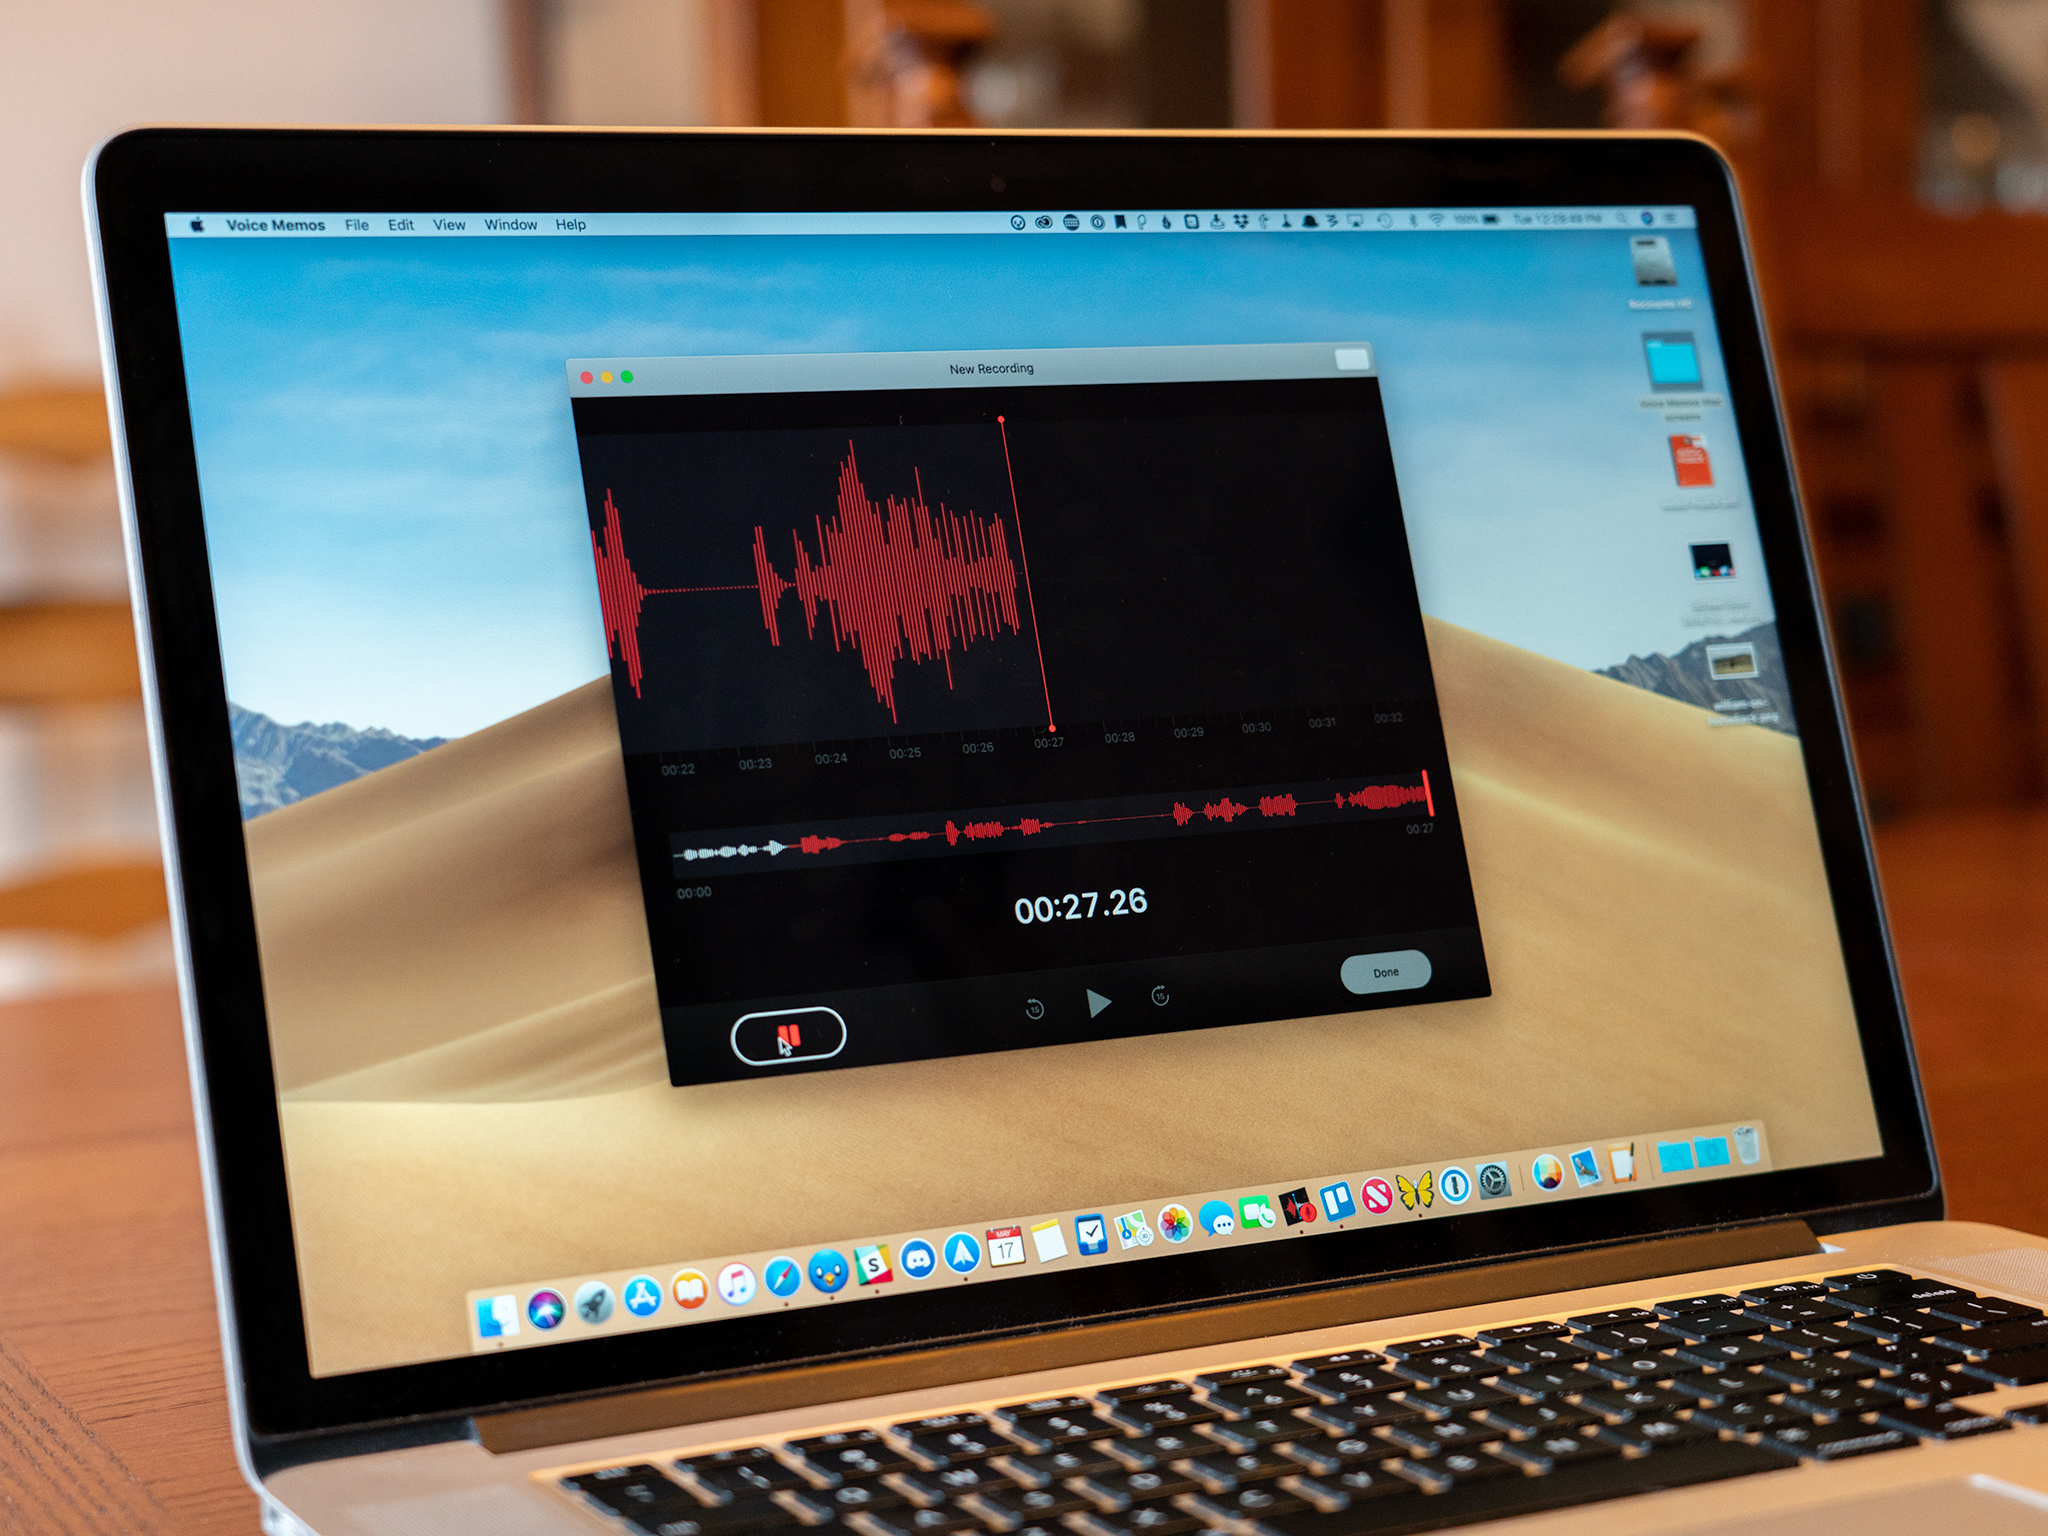 How to use Voice Memos on Mac | iMore